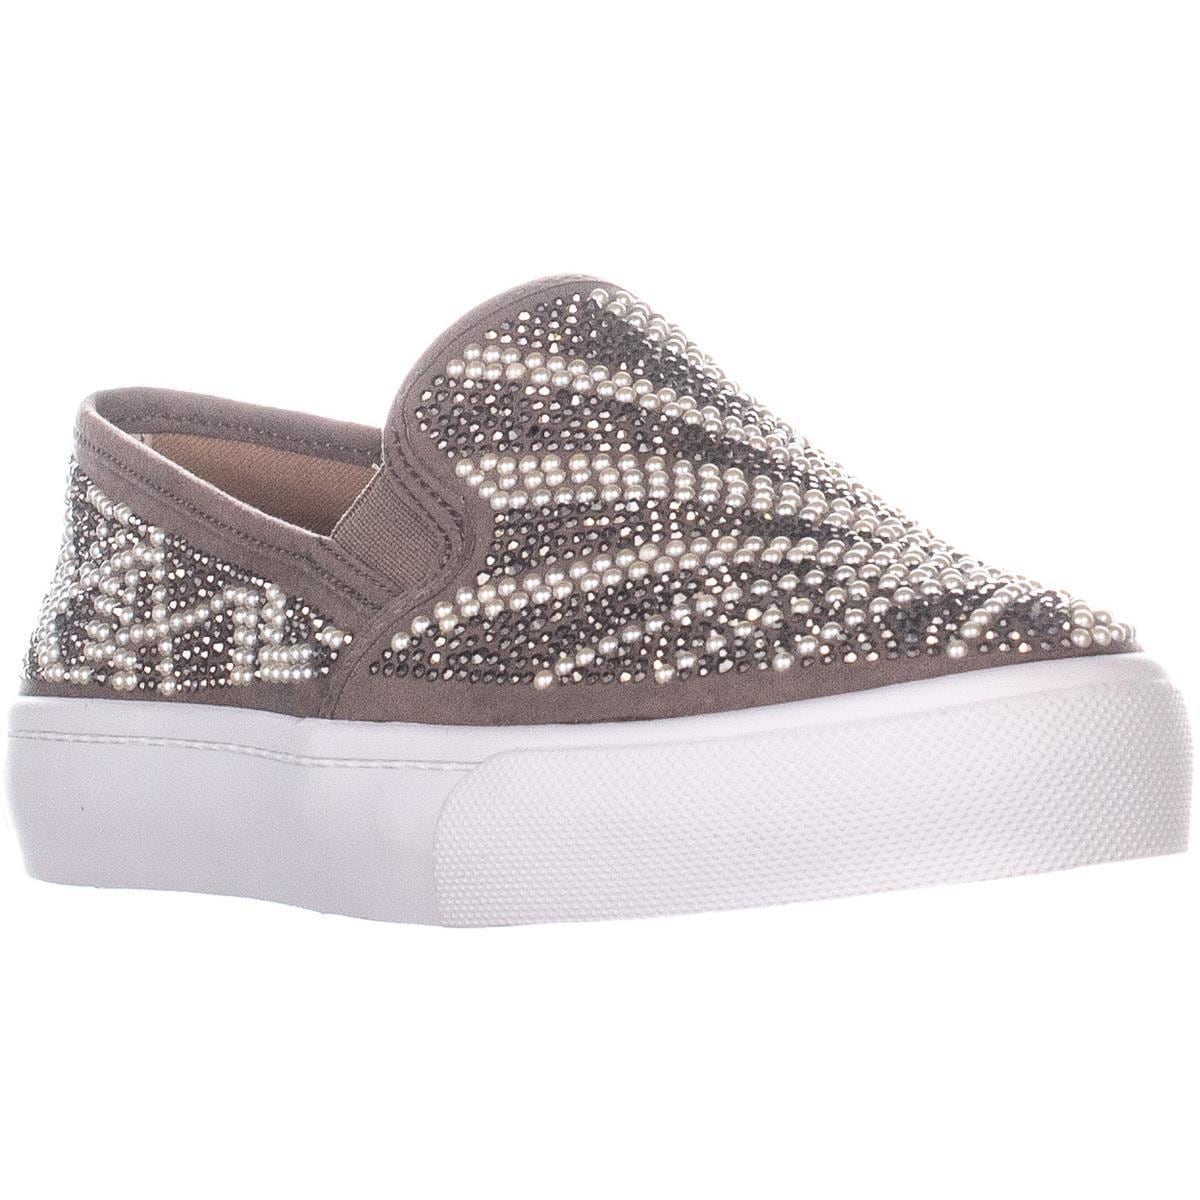 I35 Sammee11 Bedazzled Slip On Sneakers 